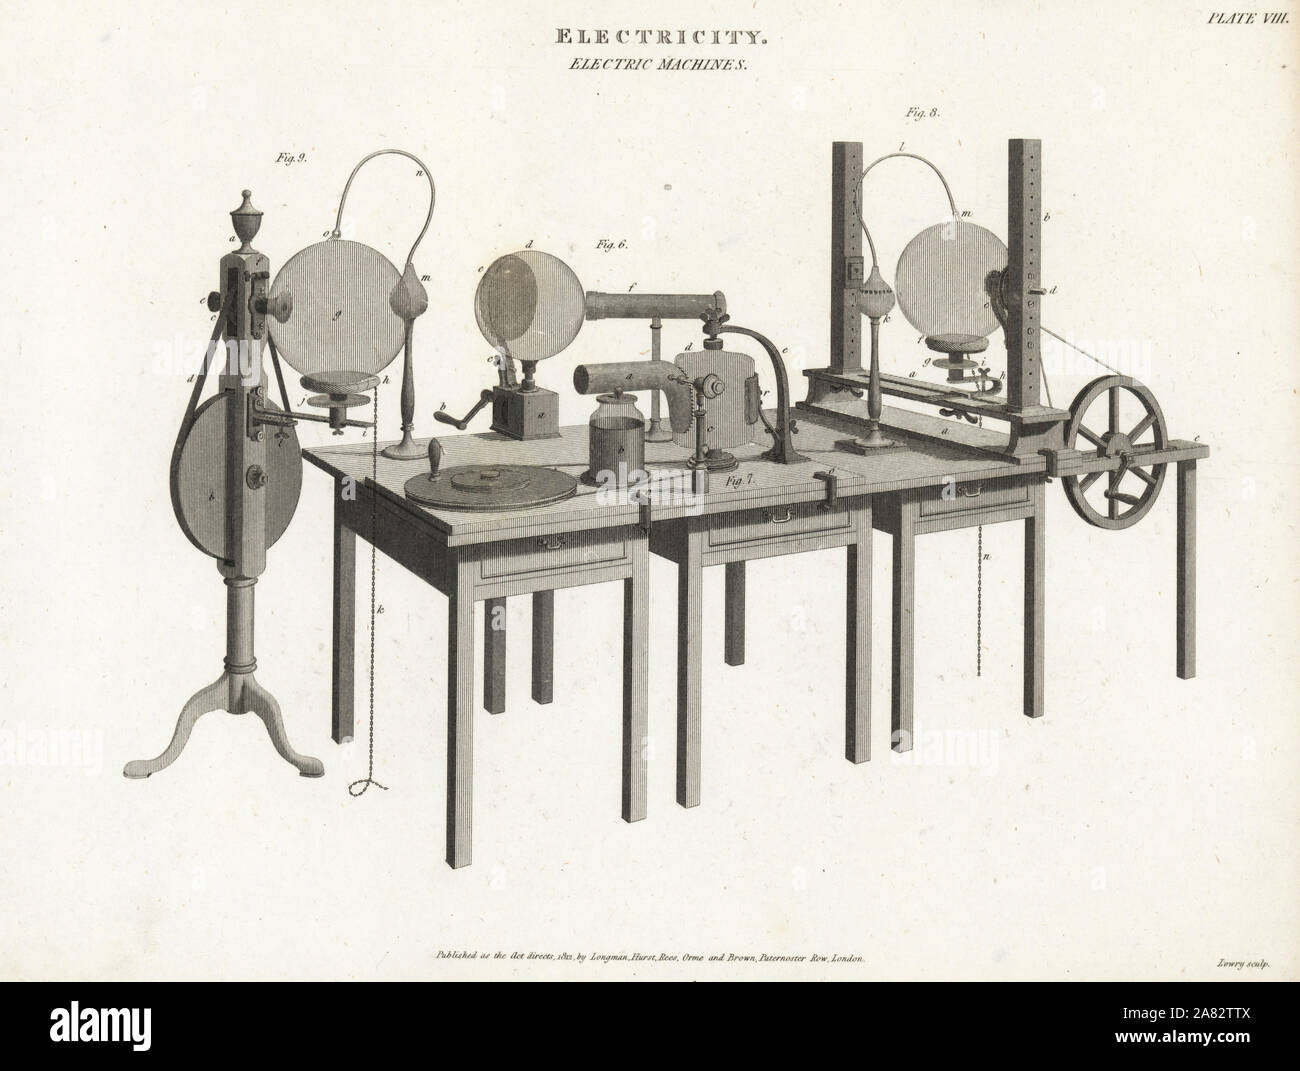 Electrical machines, 18th century. Copperplate engraving by Wilson Lowry from Abraham Rees' Cyclopedia or Universal Dictionary of Arts, Sciences and Literature, Longman, Hurst, Rees, Orme and Brown, London, 1812. Stock Photo